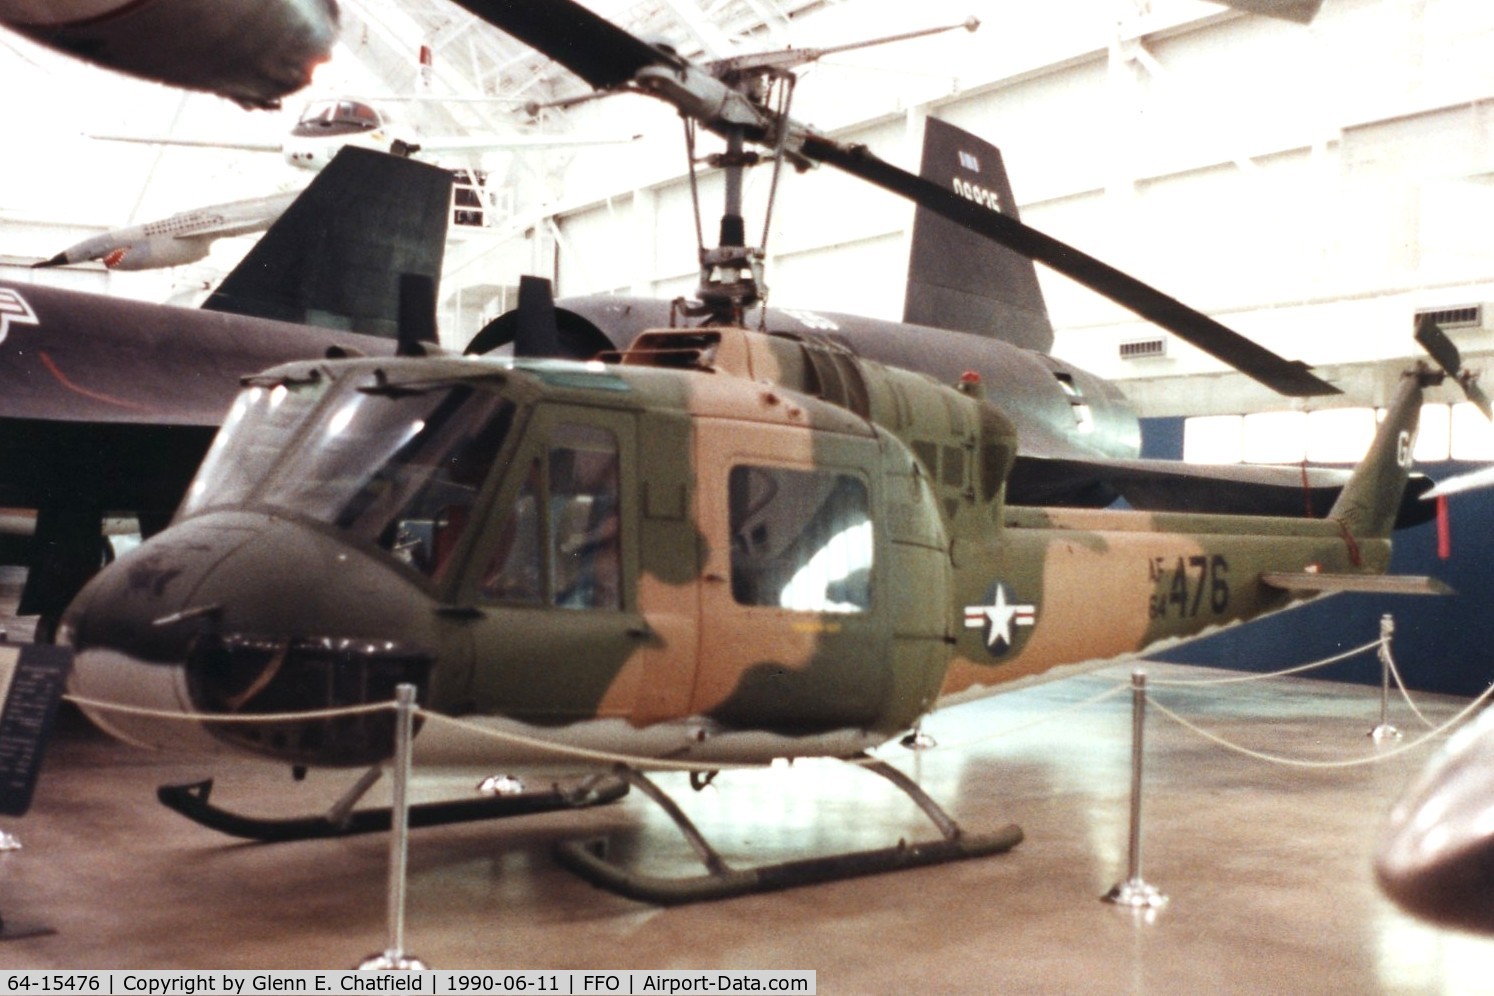 64-15476, 1964 Bell UH-1P Iroquois C/N 7026, UH-1P at the National Museum of the U.S. Air Force